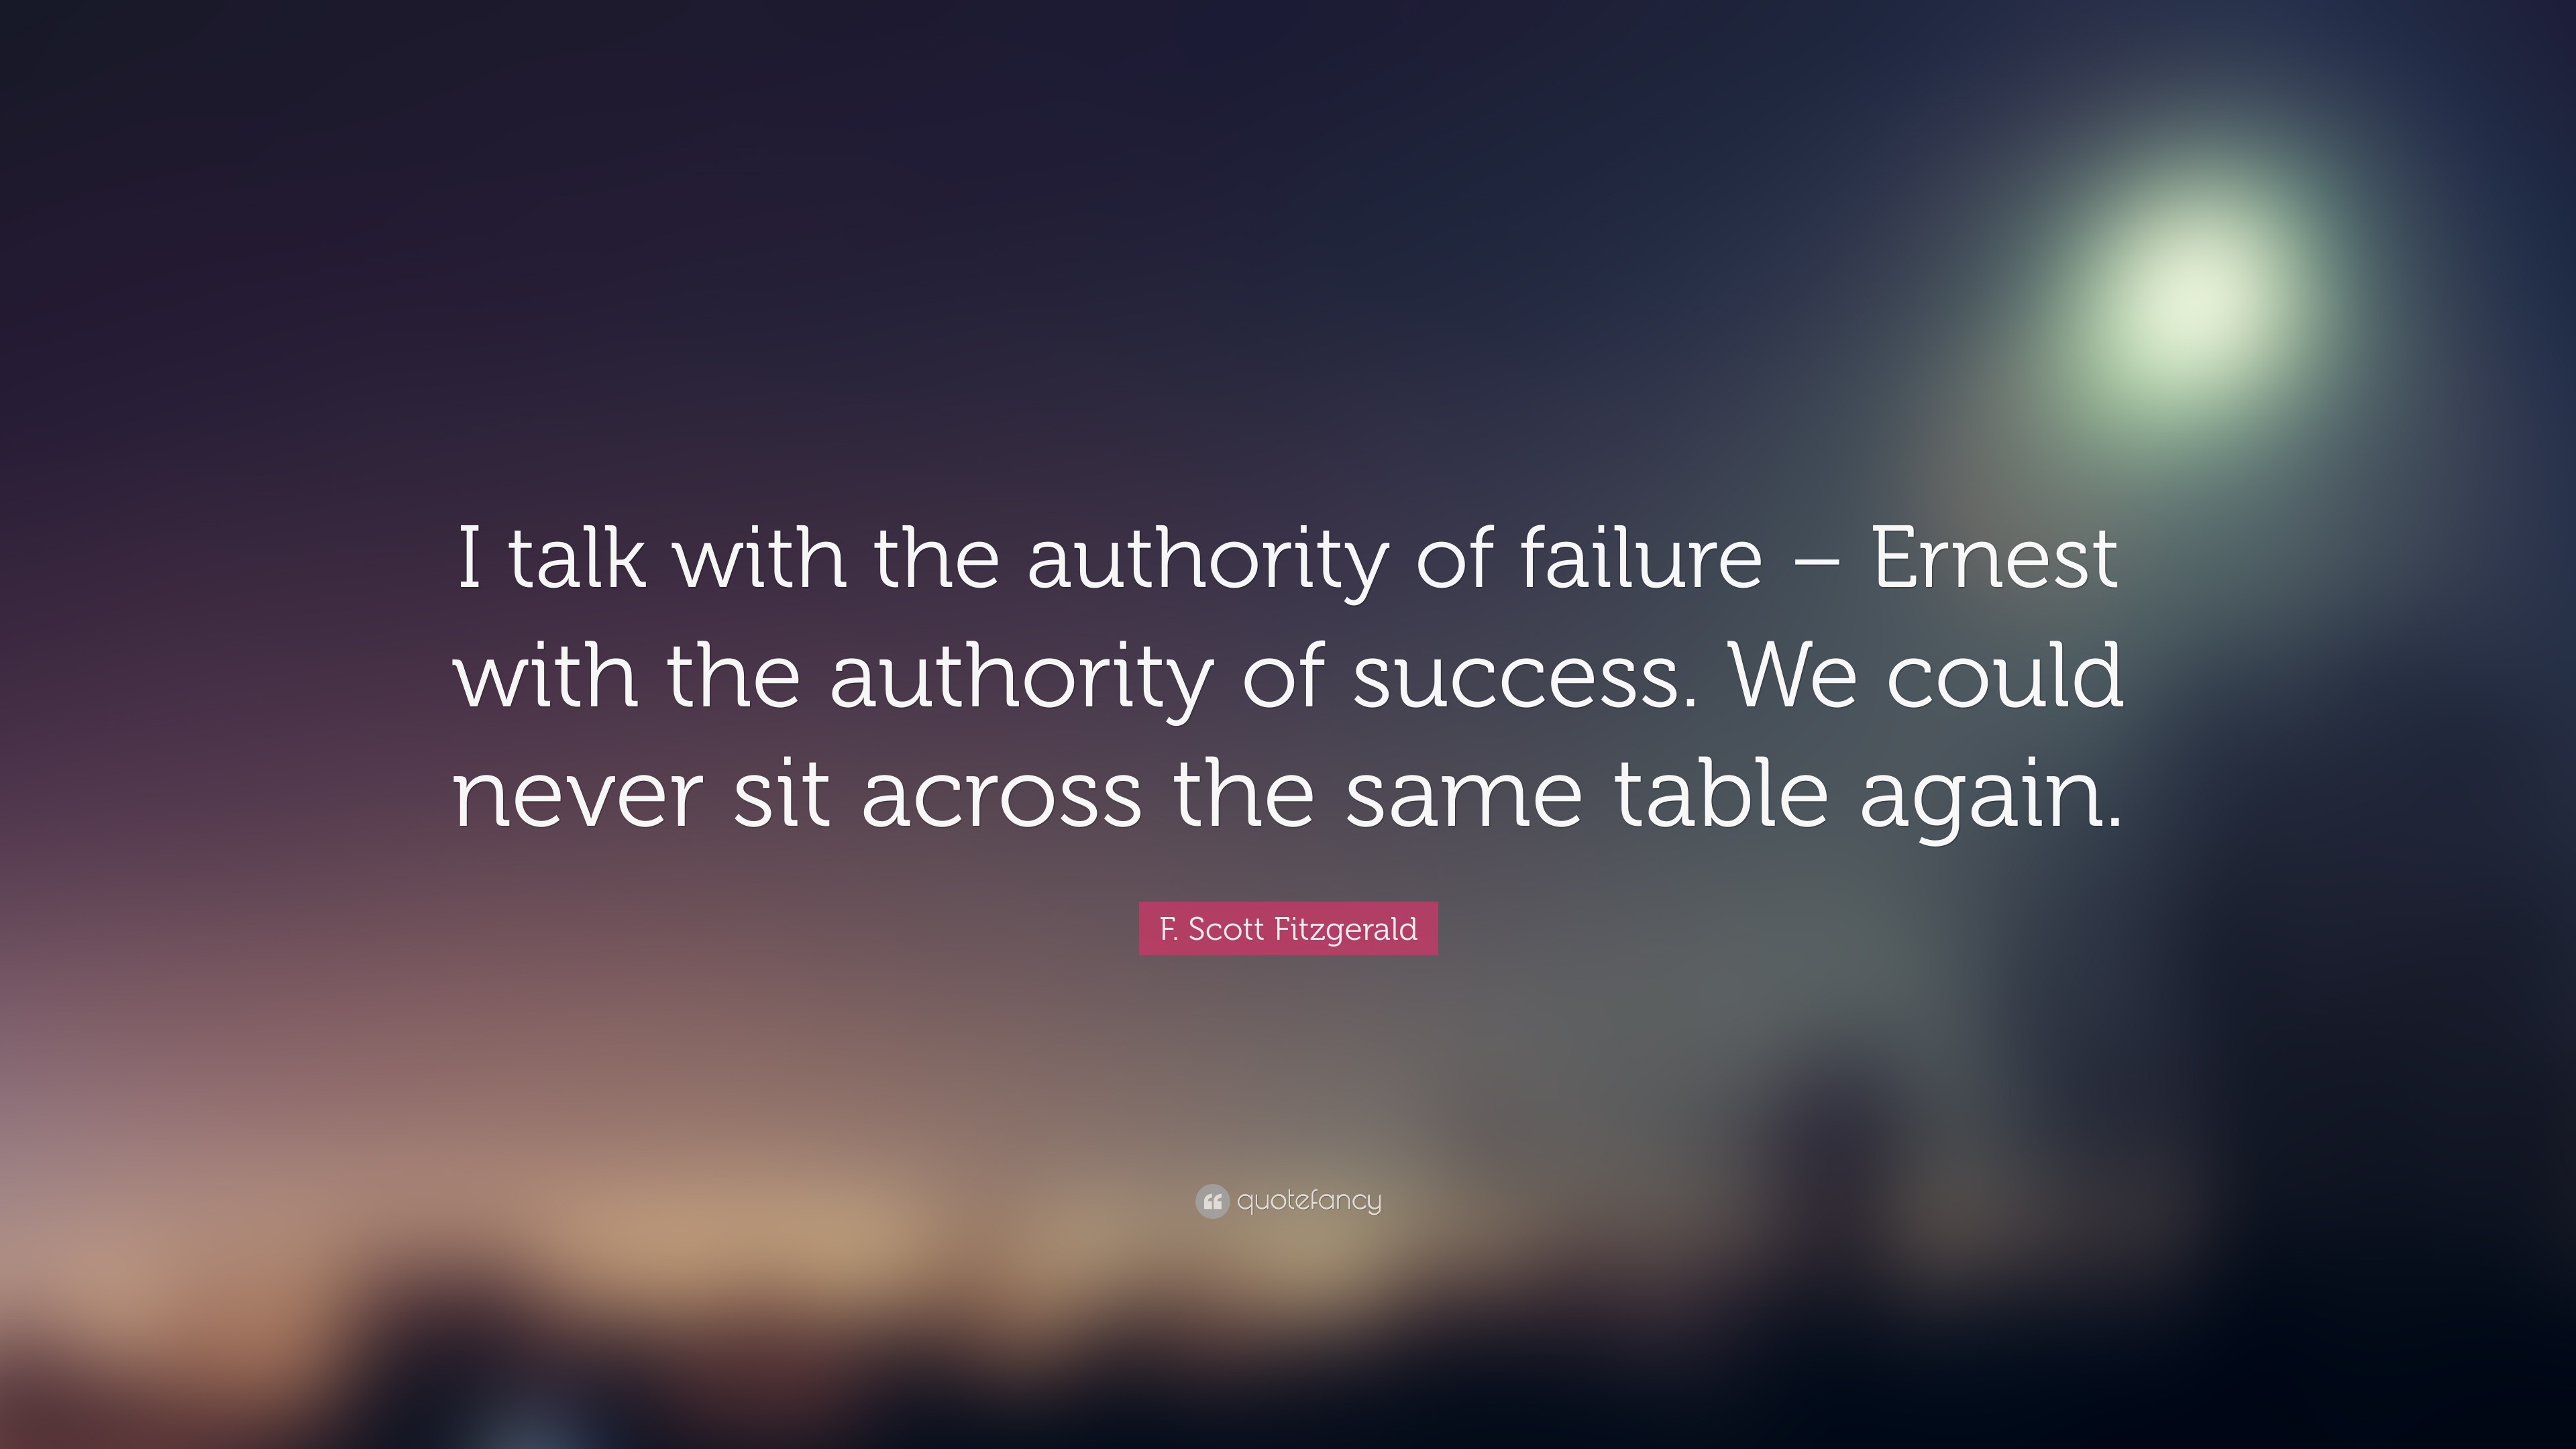 F. Scott Fitzgerald Quote: “I talk with the authority of failure